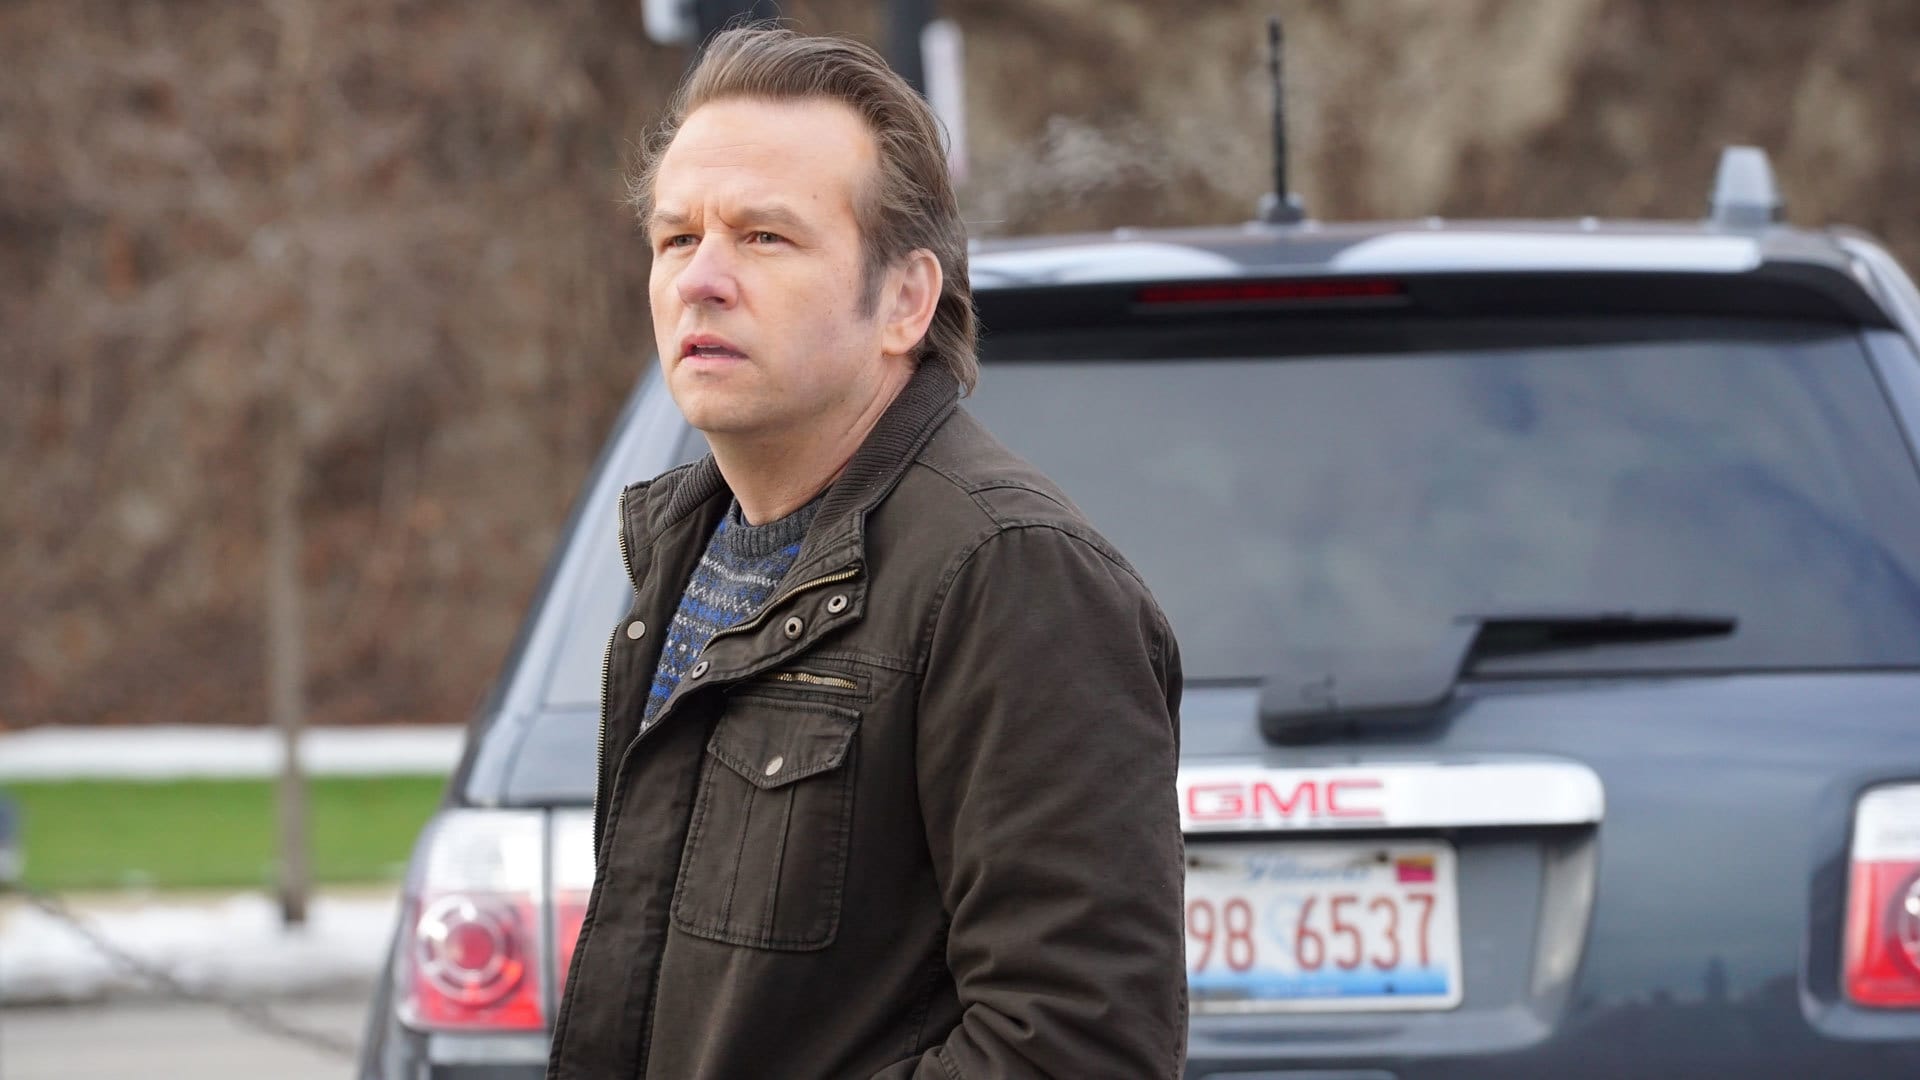 Chicago P.D. - Season 3 Episode 14 : The Song of Gregory Williams Yates (II)